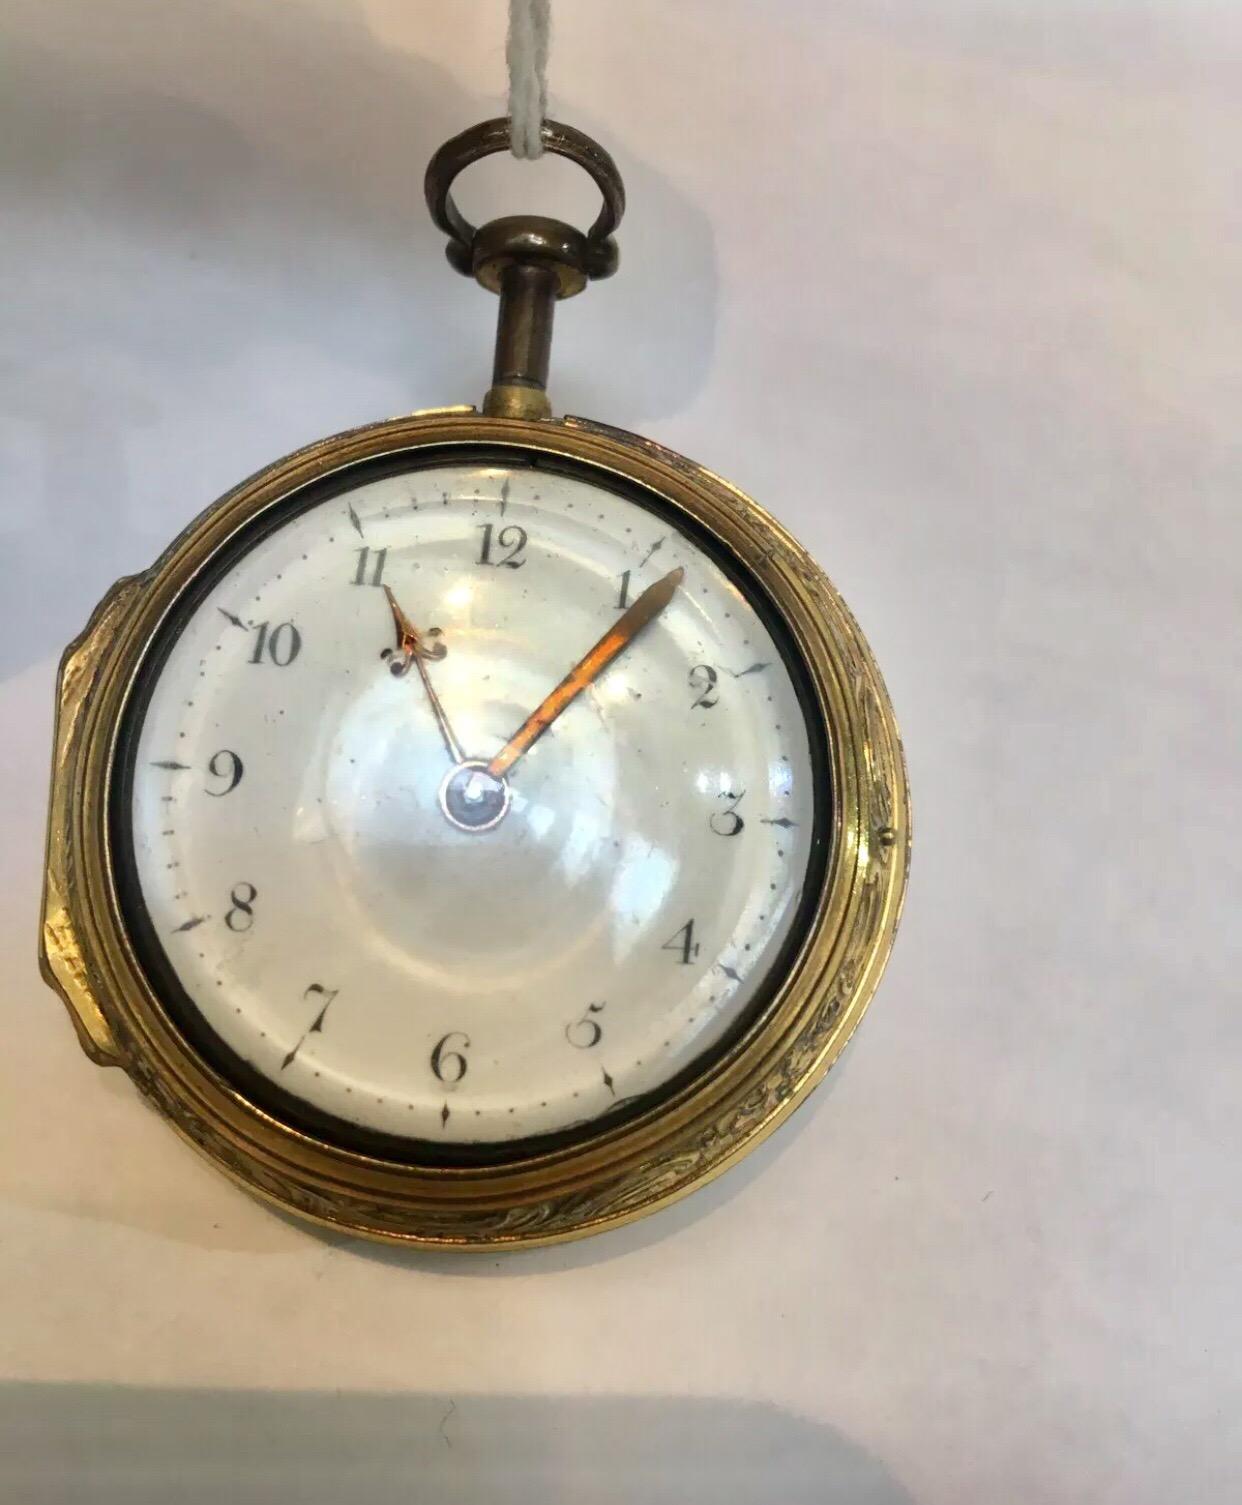 
An Early Rare “Dumb” Quarter Repeating Repousse Verge Fusee Pocket Watch By Hubert London.

Notes:

Dumb repeater – a rare, but somewhat practical type of repeater that actually causes the case to vibrate rather than create an audible tone. It was